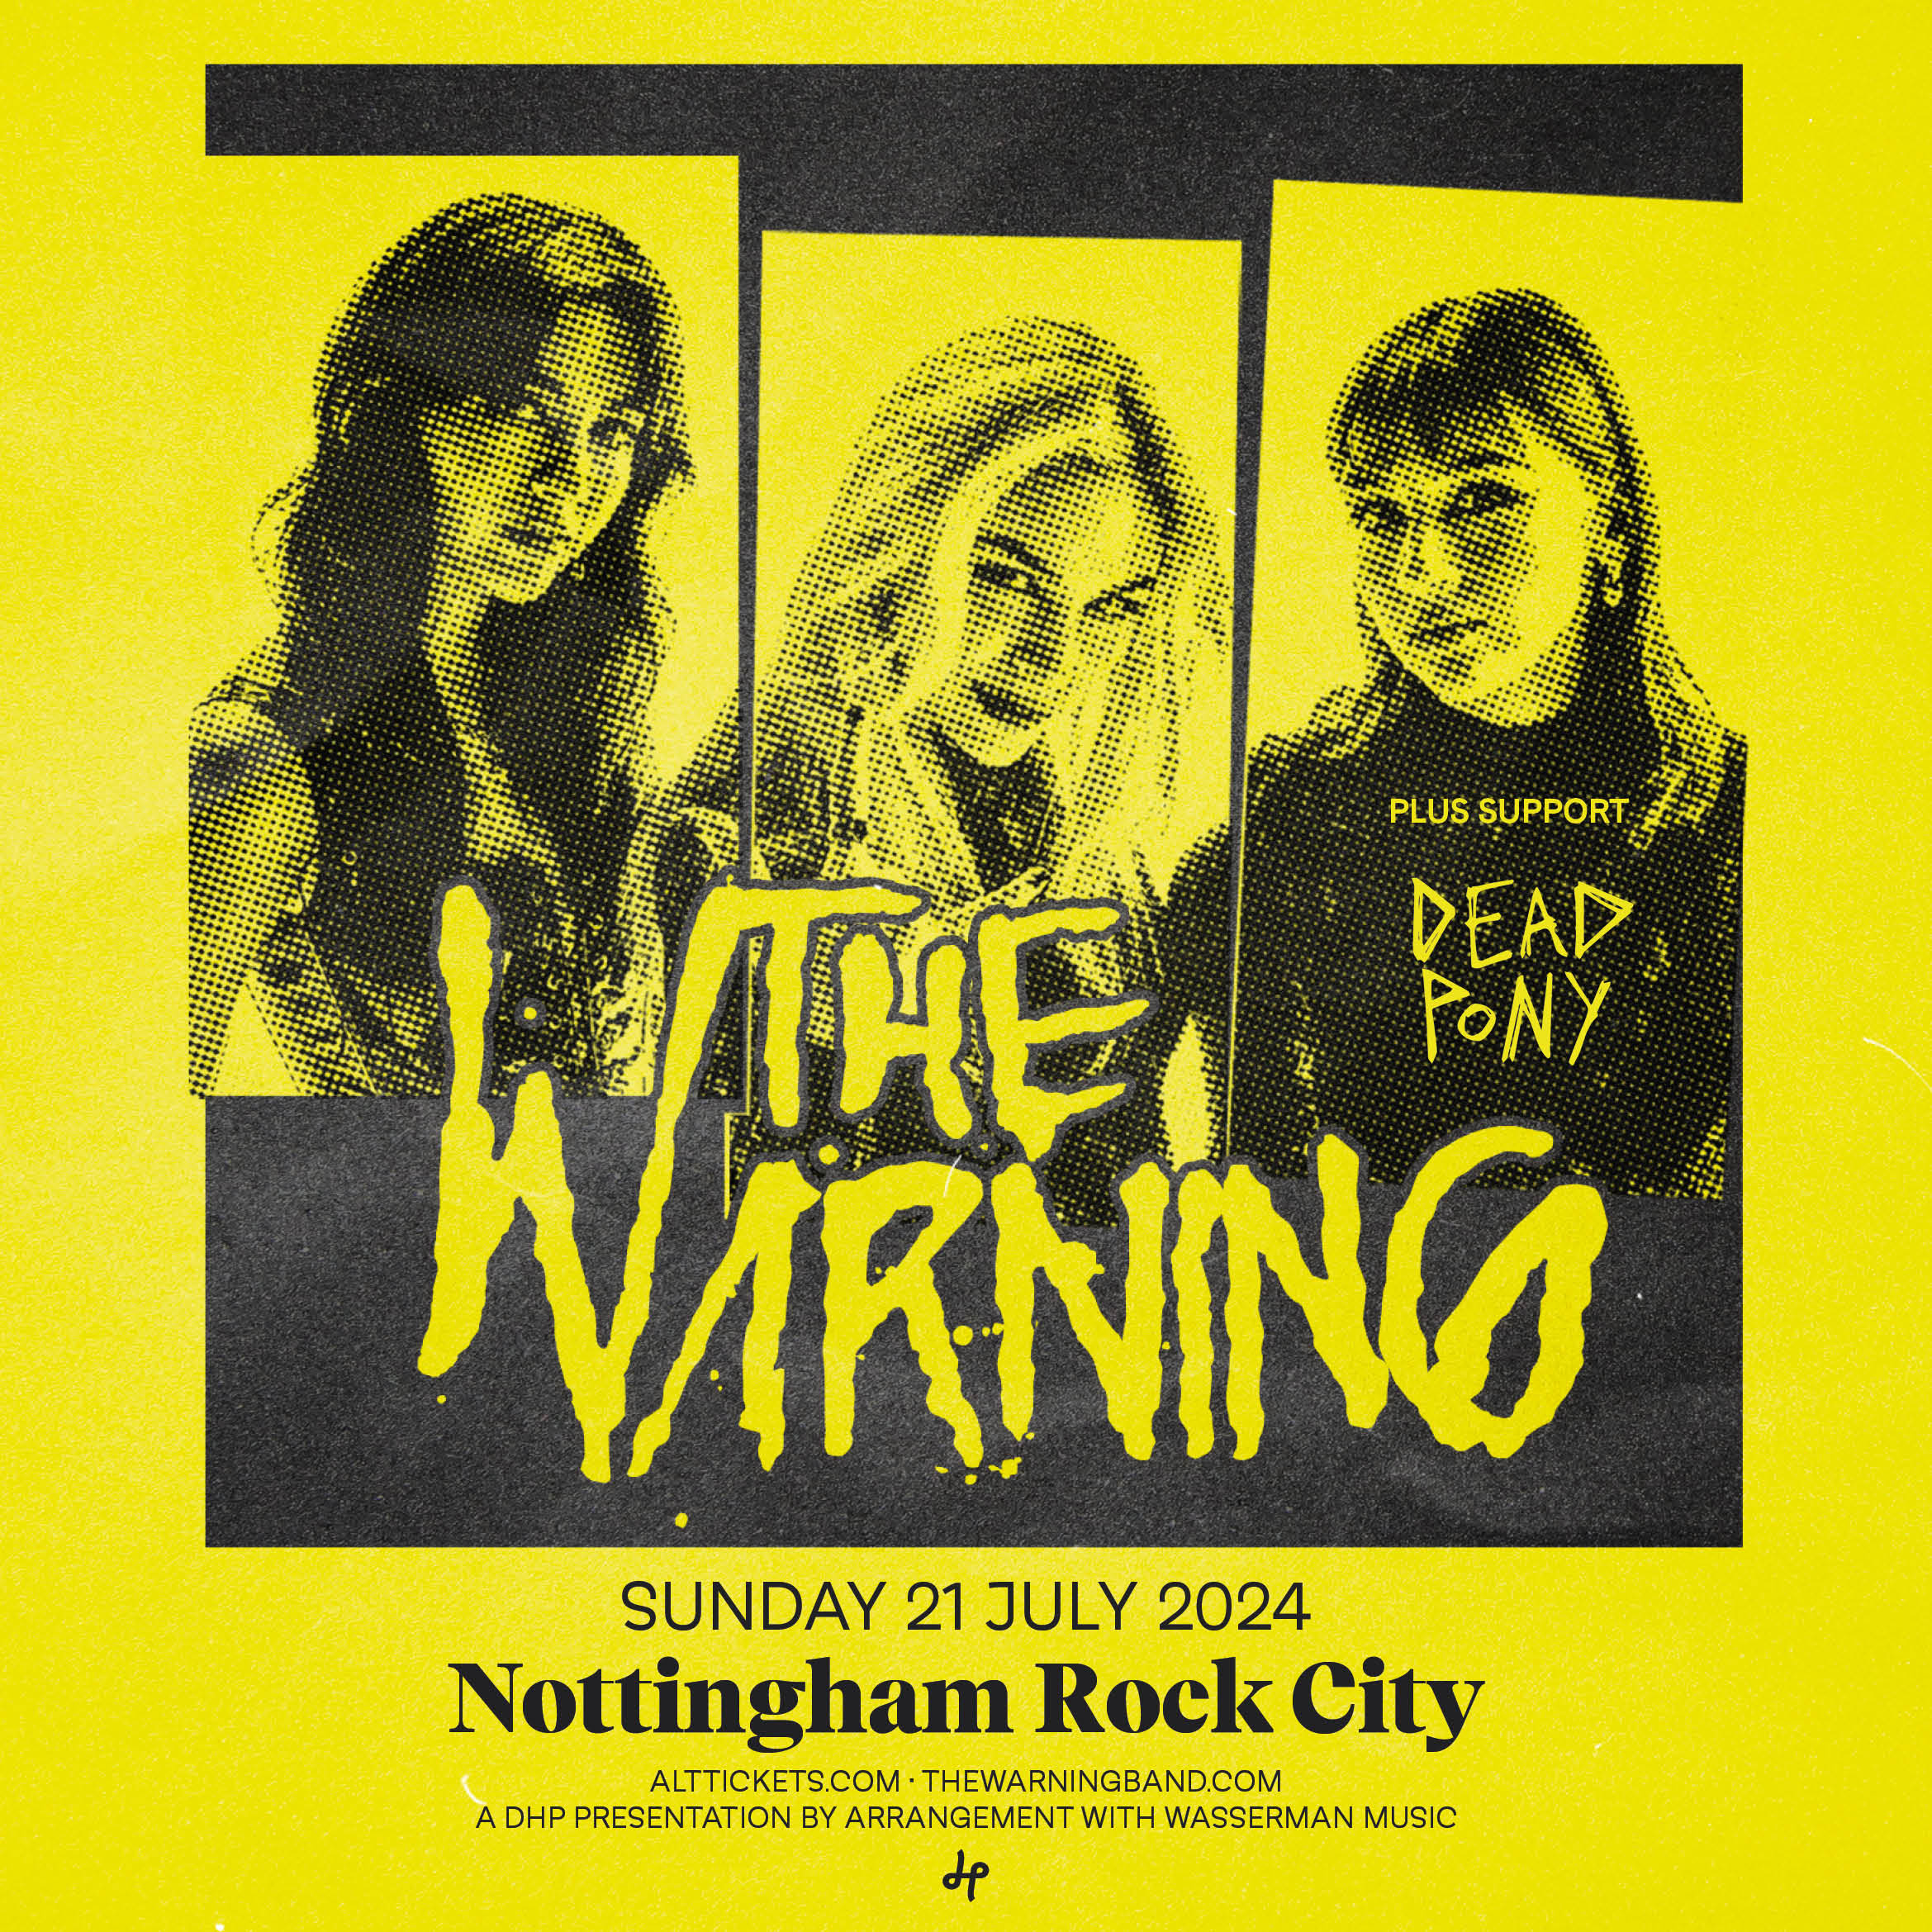 THE WARNING POSTER